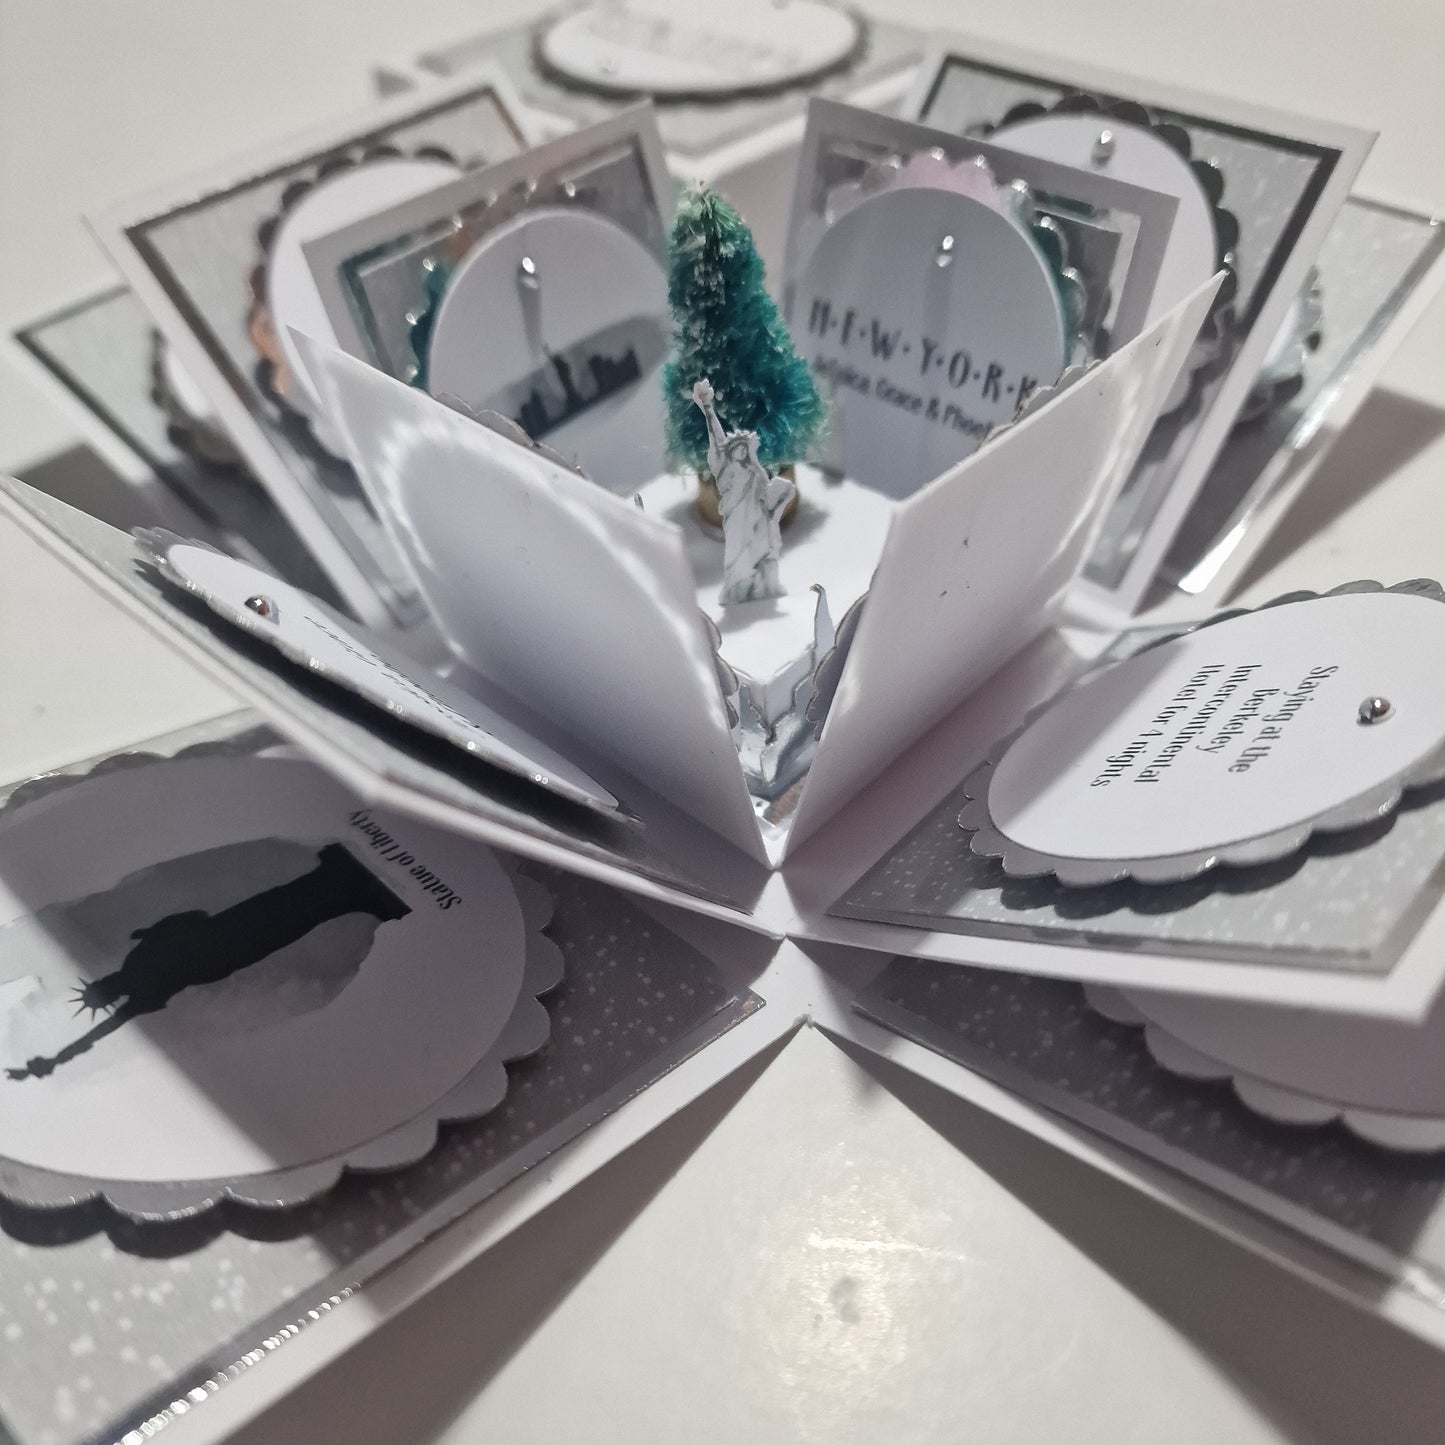 White & Silver New York at Christmas Trip Reveal Exploding Occasion Box. Featuring snowy papers, iconic land marks, verses & messages. Personalised with names, dates & trip info